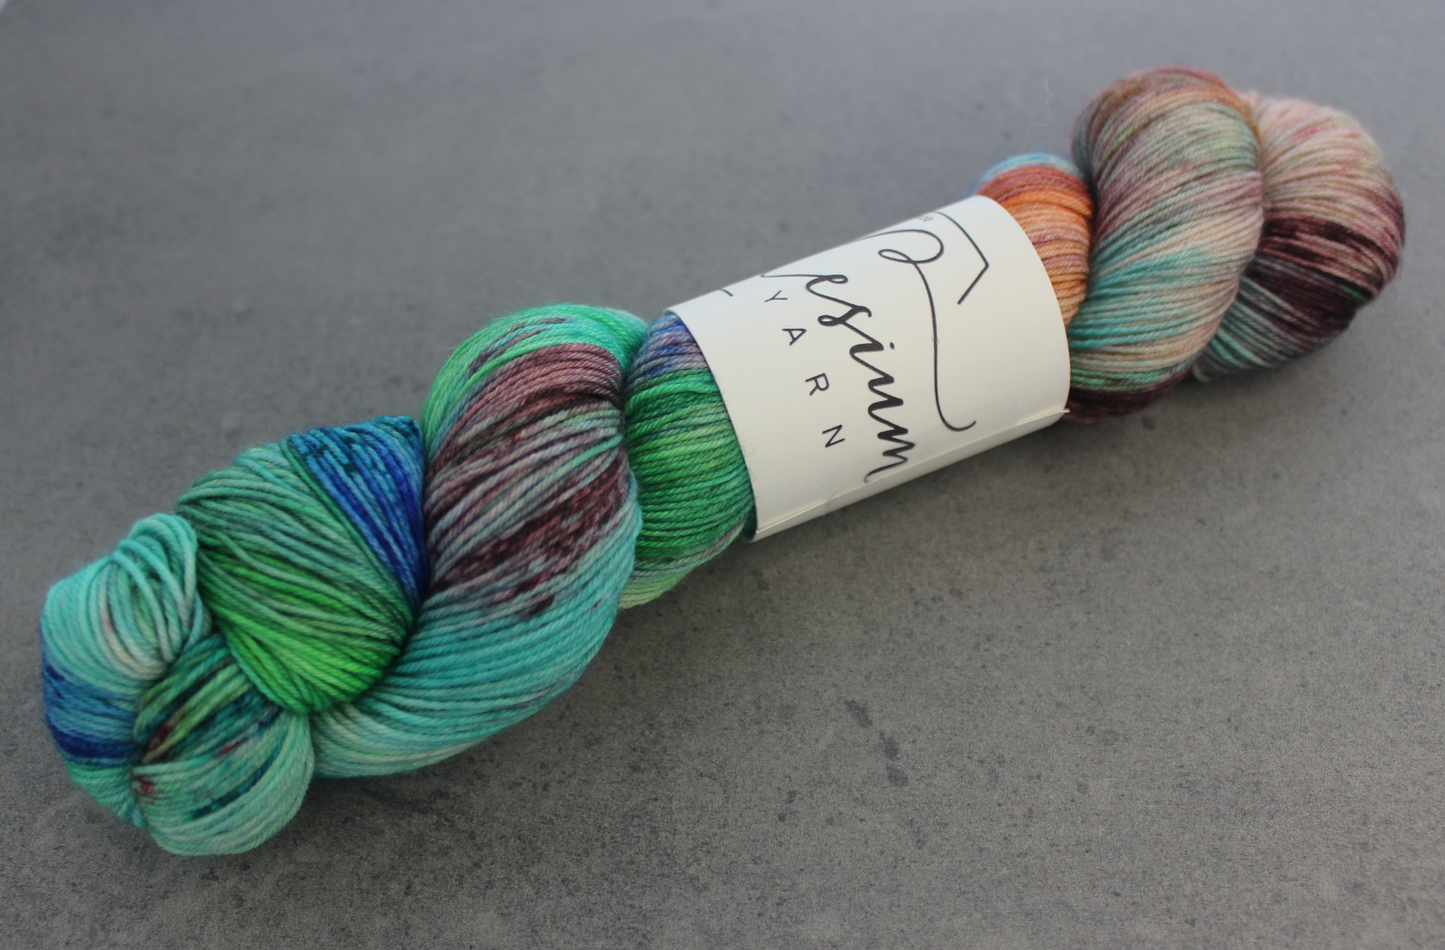 A skein of reserved multicolored hand-dyed yarn with sections of blue, aqua, green, burgundy, orange, and white.